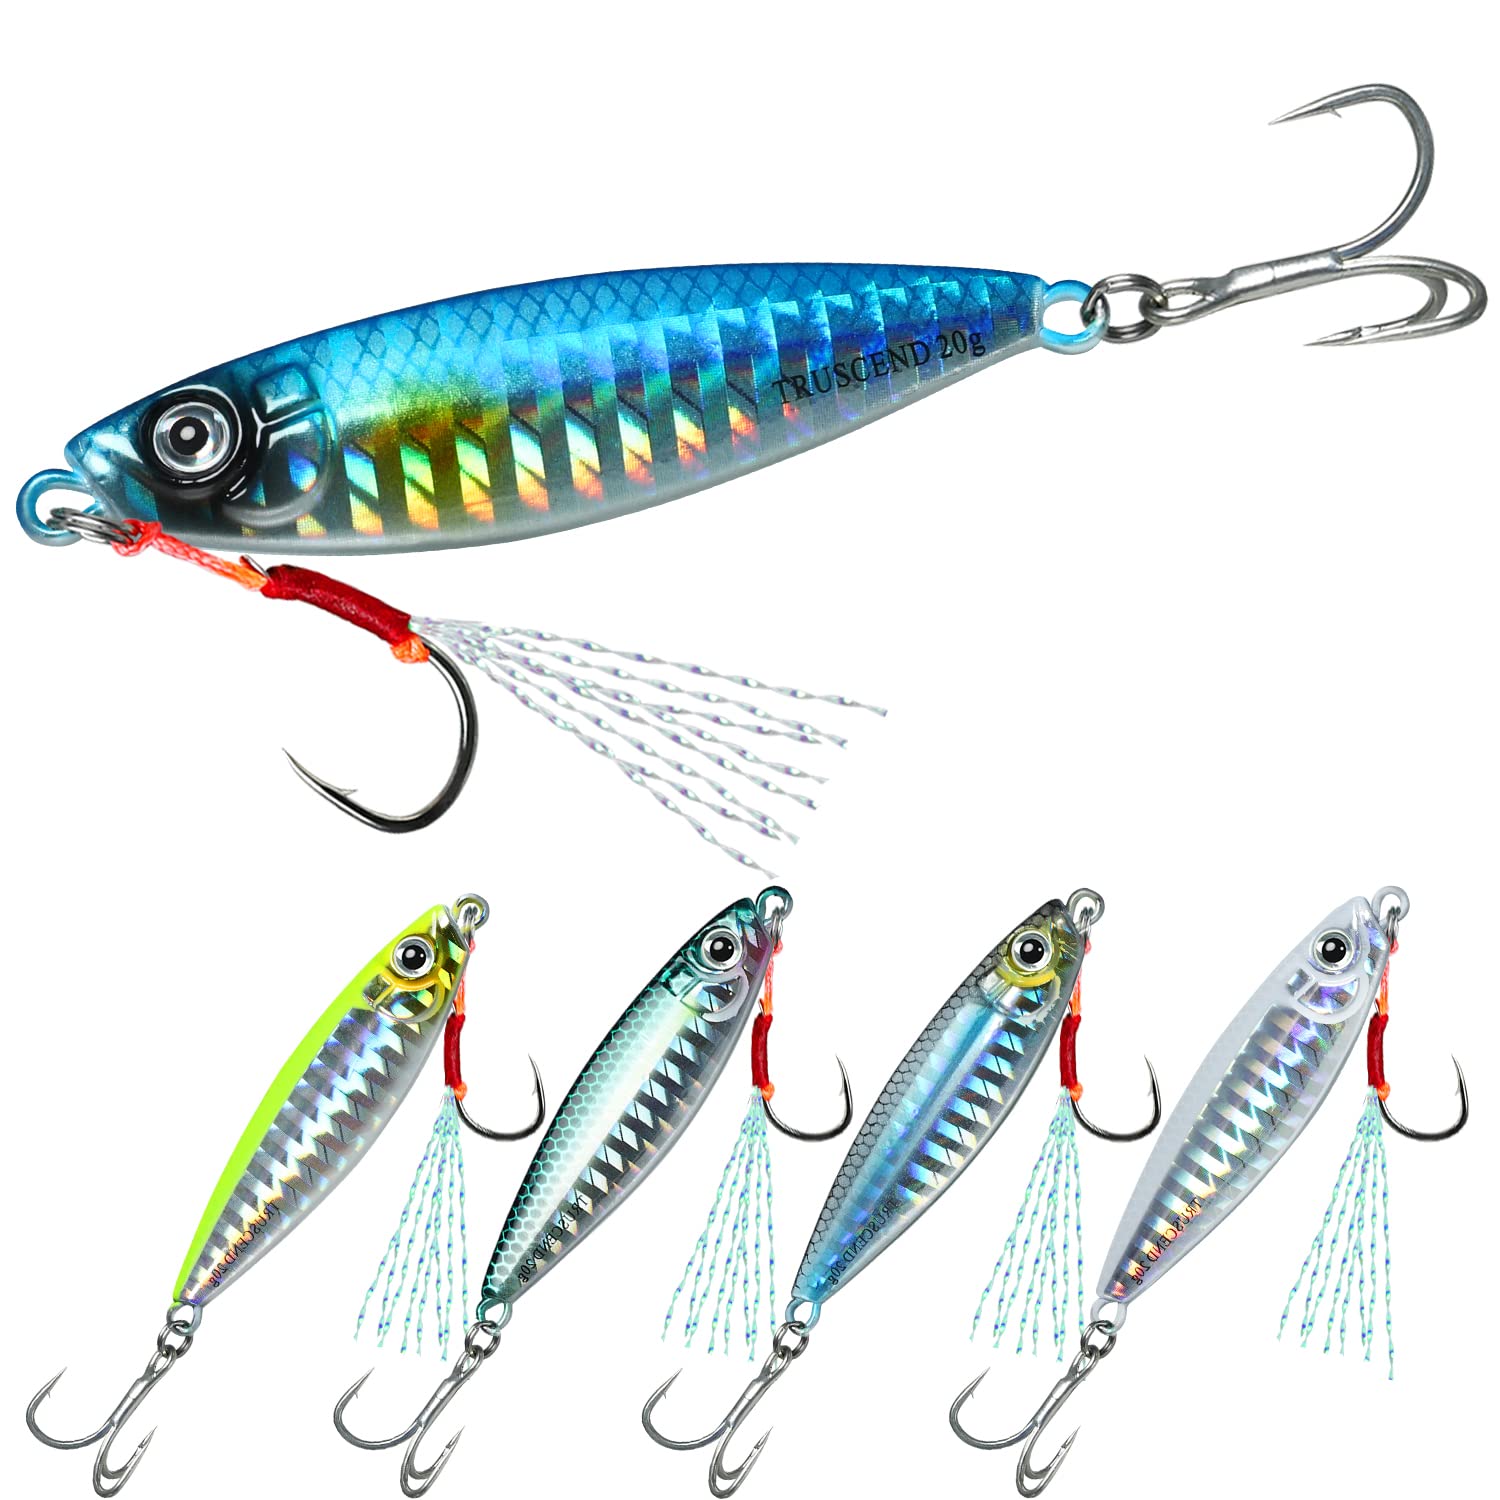 TRUSCEND Saltwater Jigs Fishing Lures 10g-160g with Russia